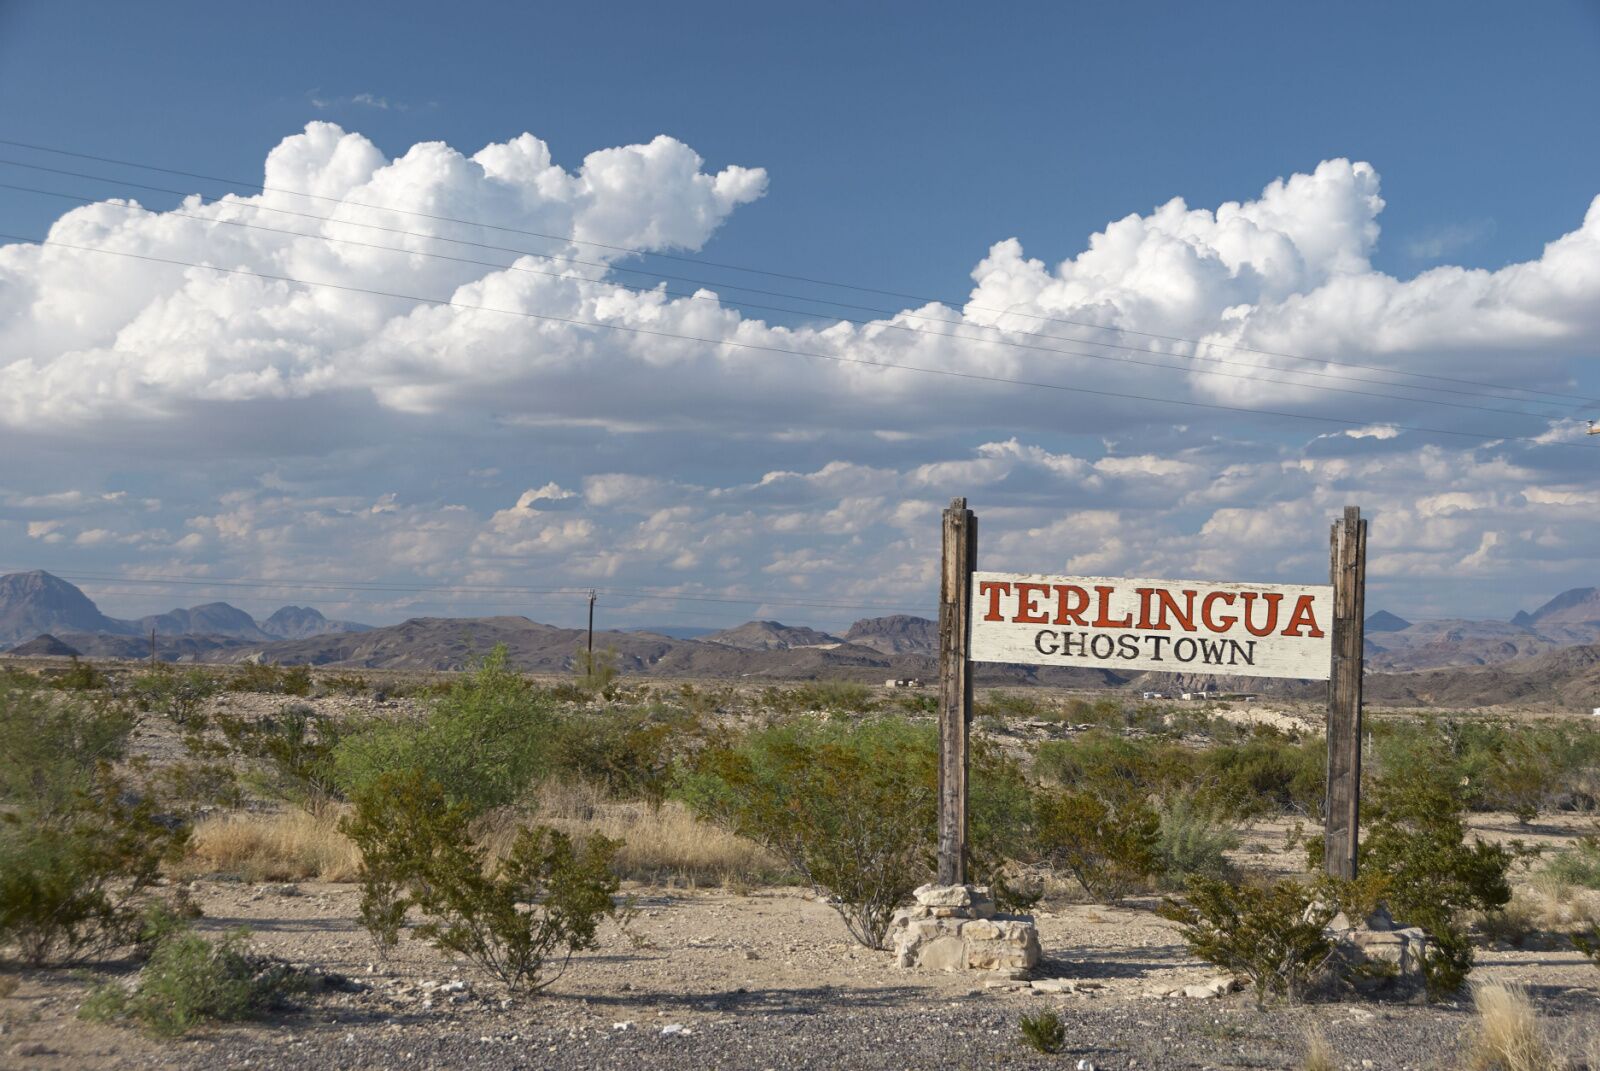 Terlingua, a small town outside Big Bend National Park 